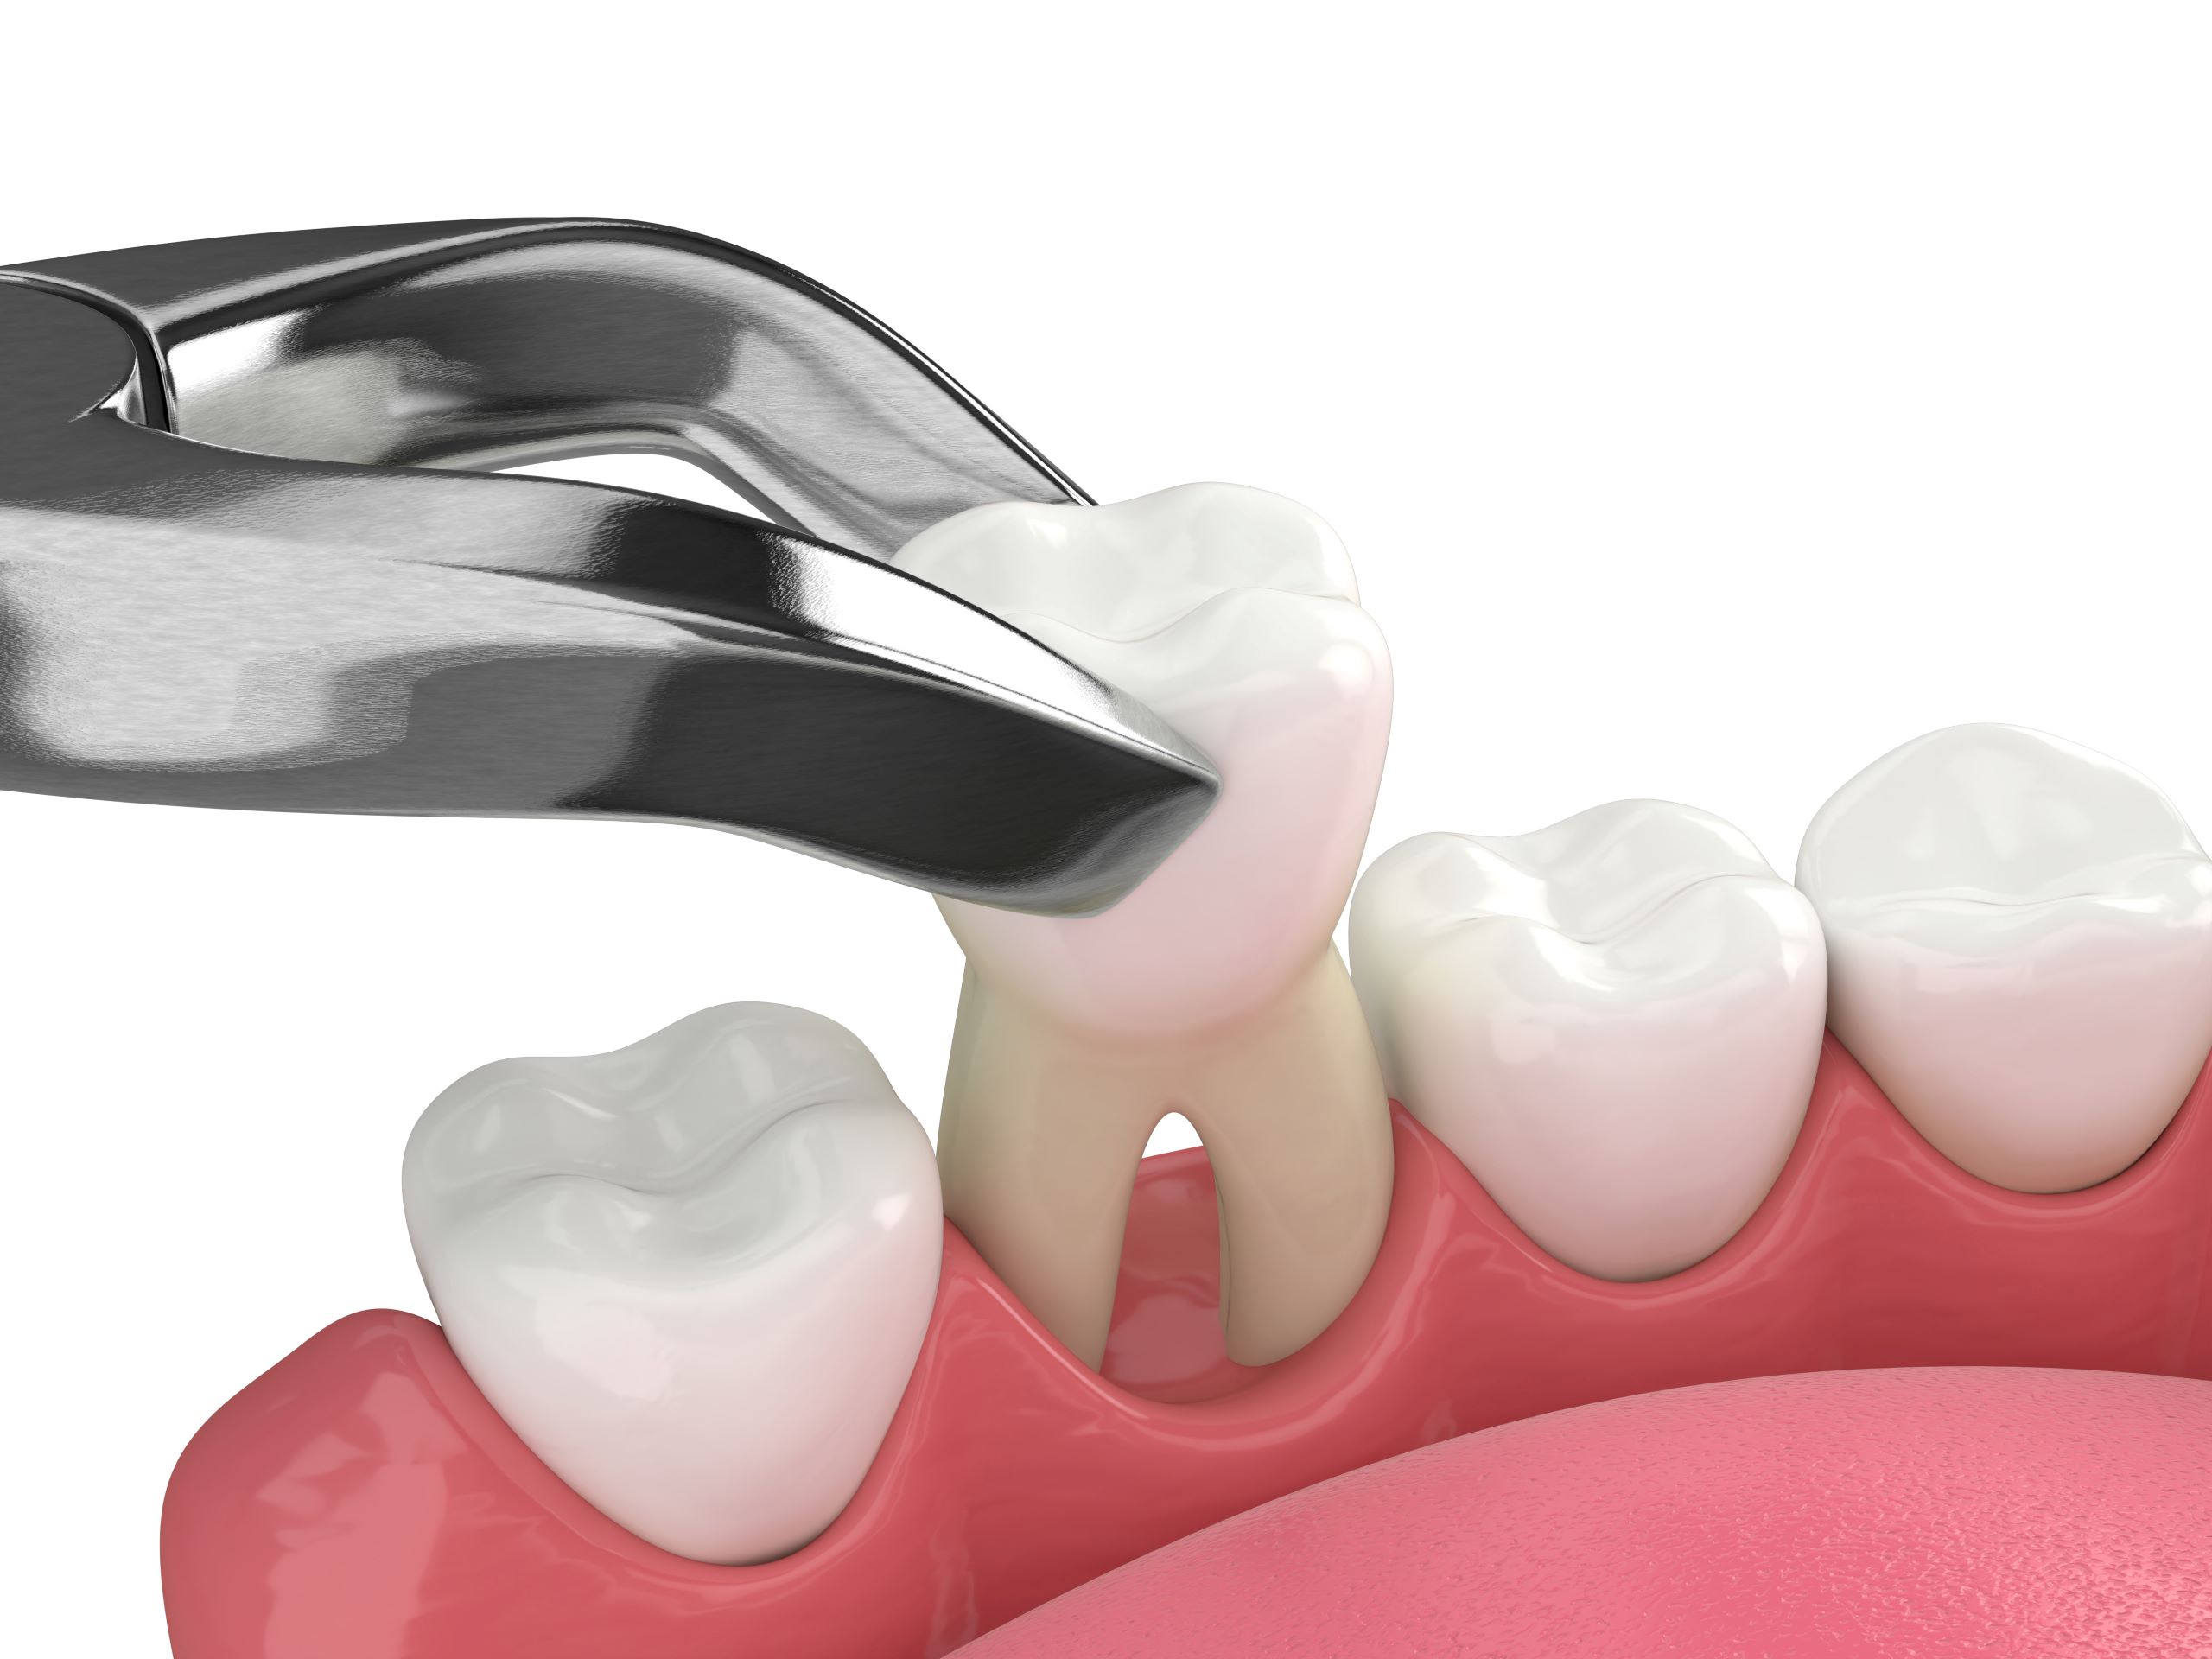 recovery tips and aftercare following tooth extraction